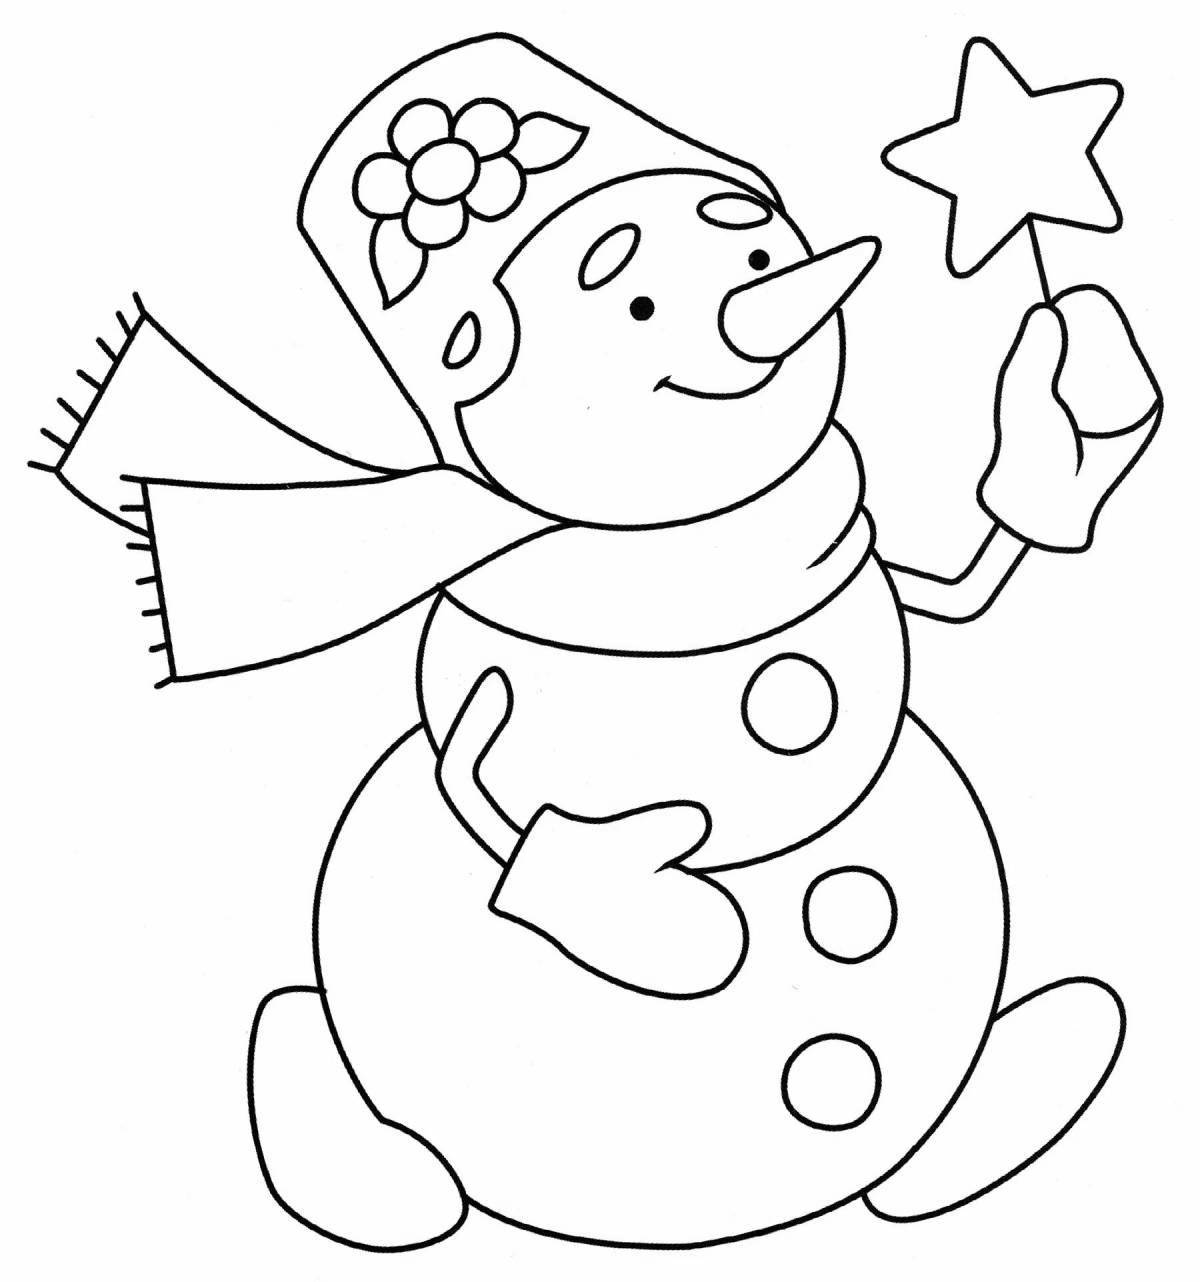 Children's holiday coloring book snowman